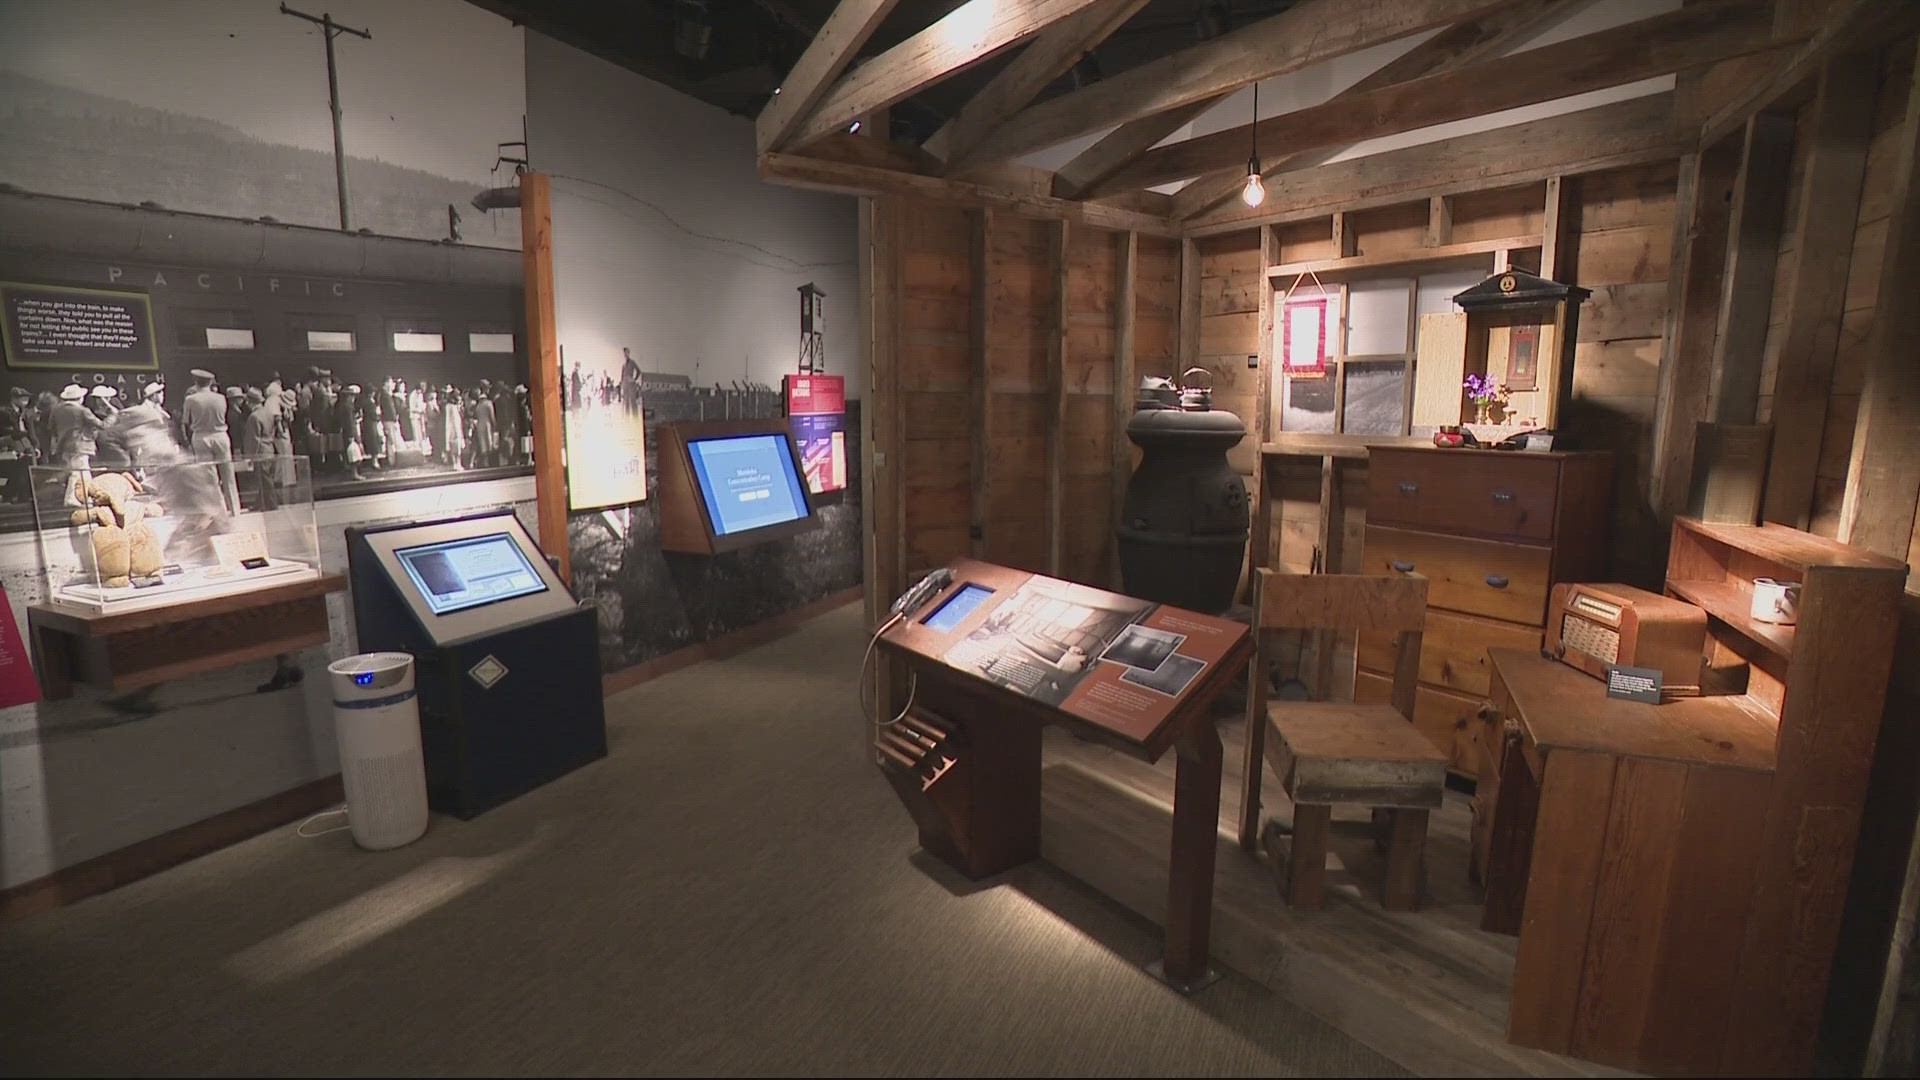 The museum located at the Naito Center in Old Town gave vistors the chance to experience Japanese history and culture.